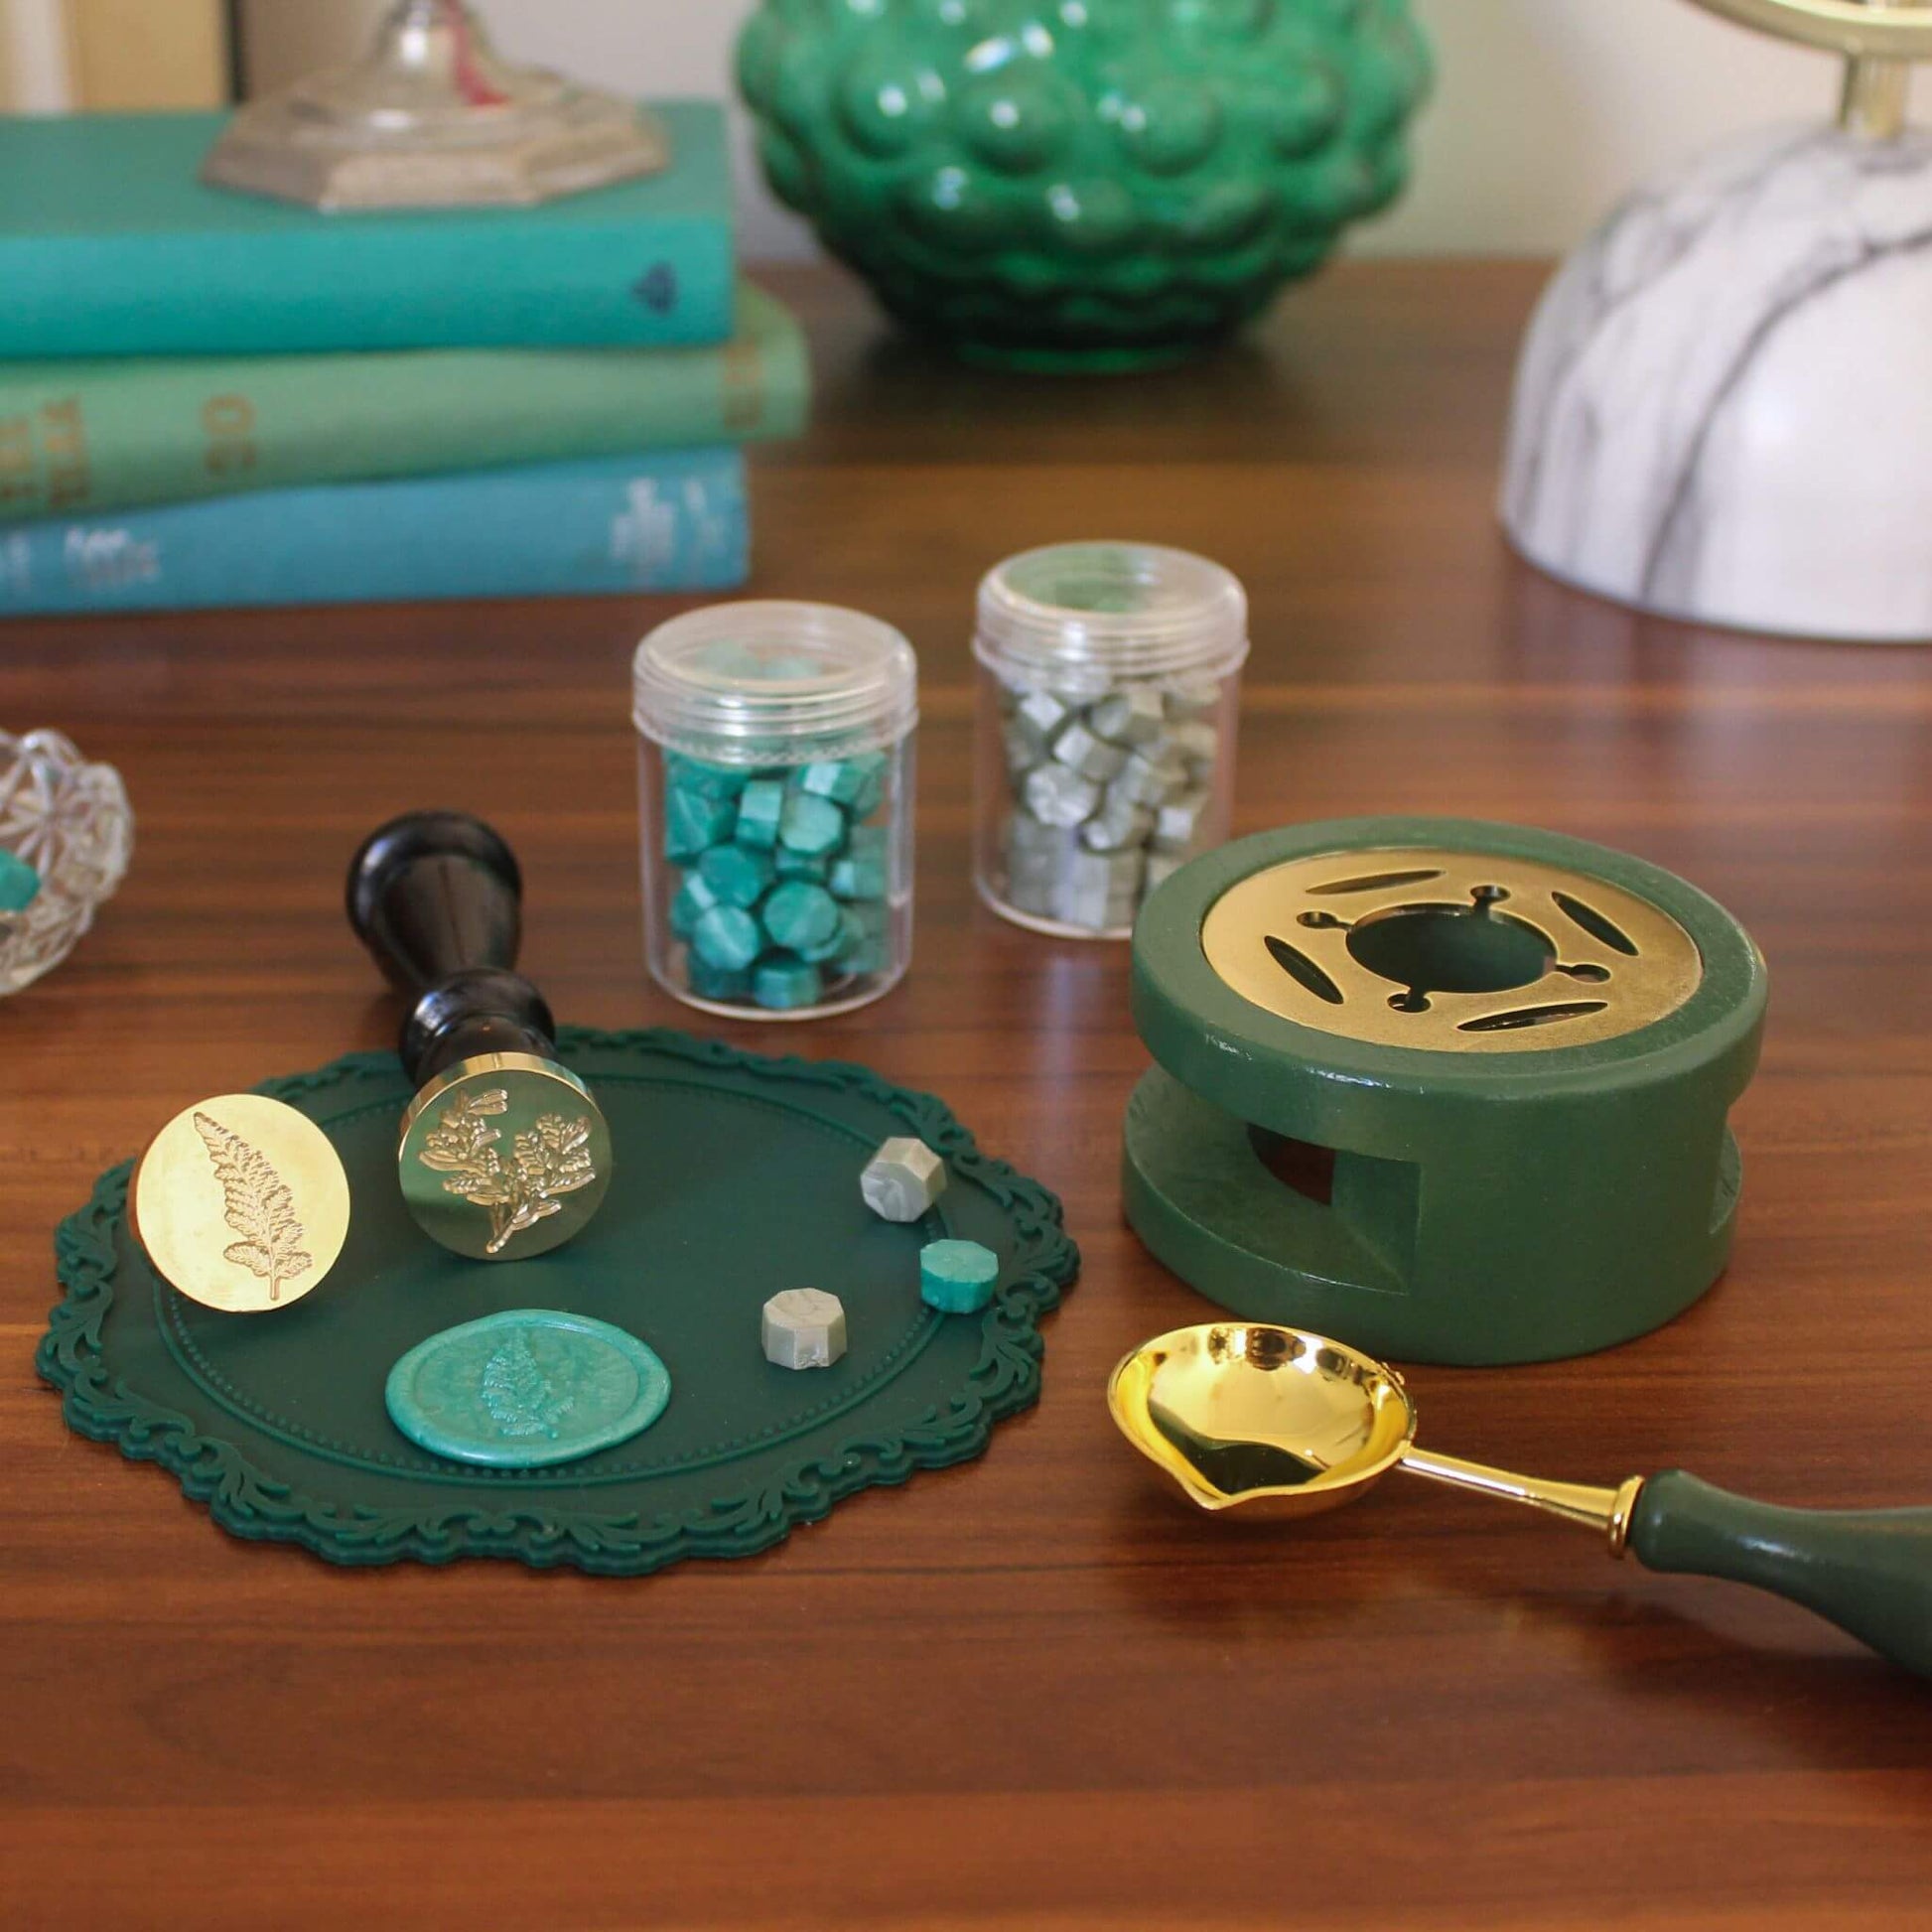 green wax seal kit on desk with wax seals and green sealing wax beads